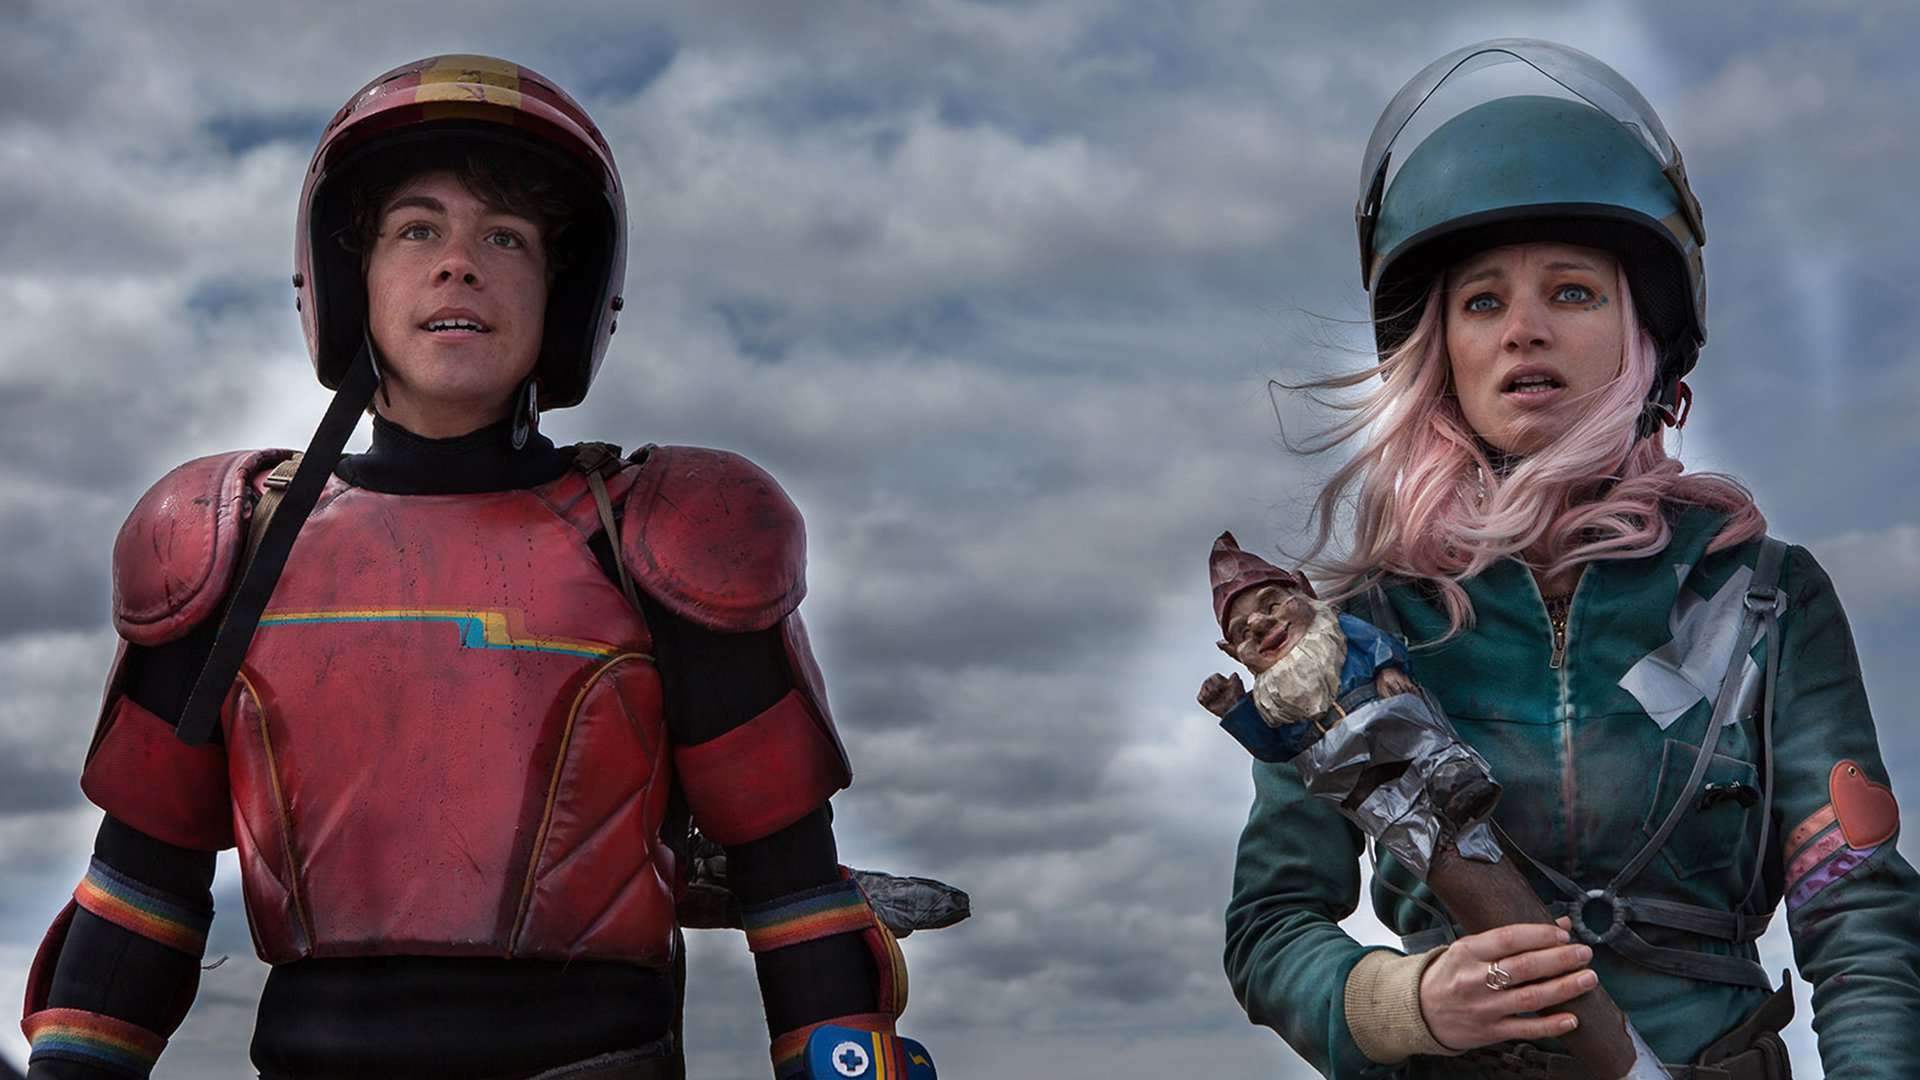 Munro Chambers and Laurence Lebouef in Turbo Kid